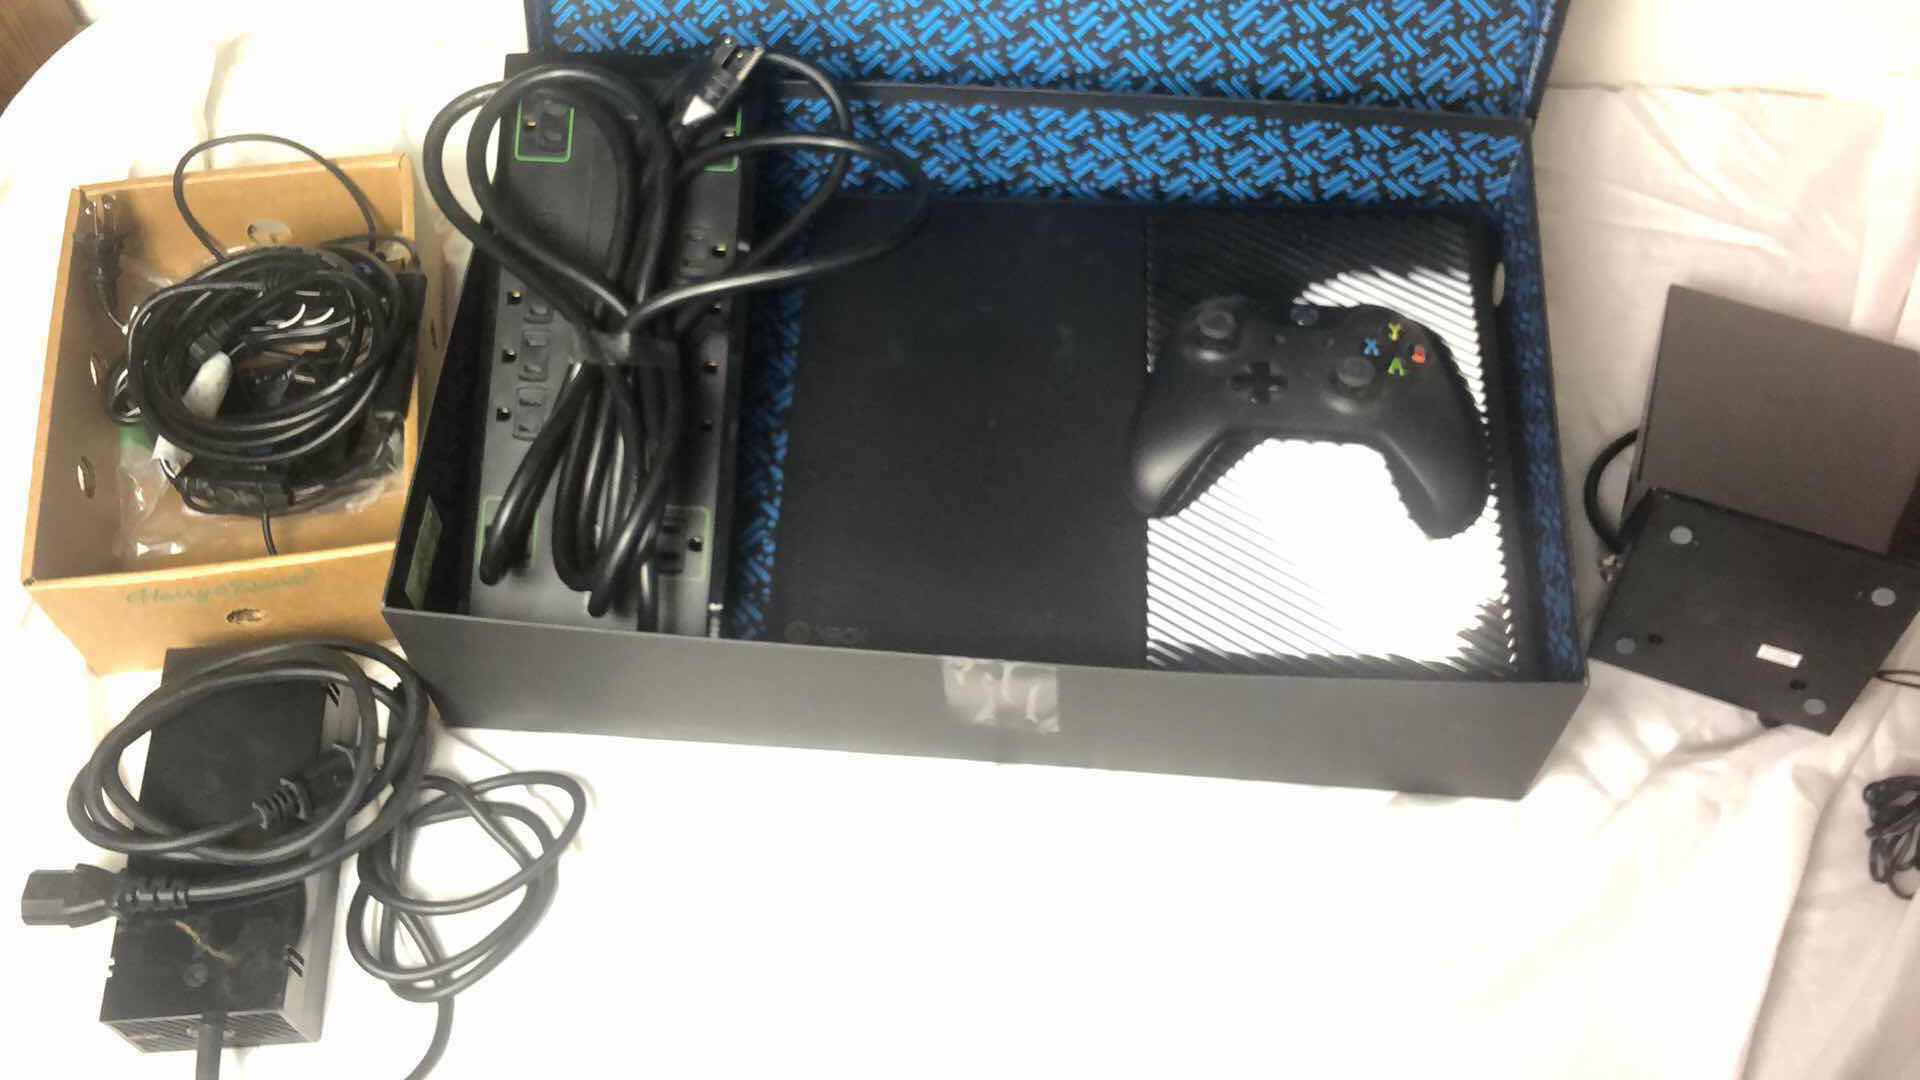 Photo 1 of XBOX 360 W CONTROLLER, WIFI ROUTER, 10 PUTLET POWER JACK, A ROKU AND 2 HDMI CABLES